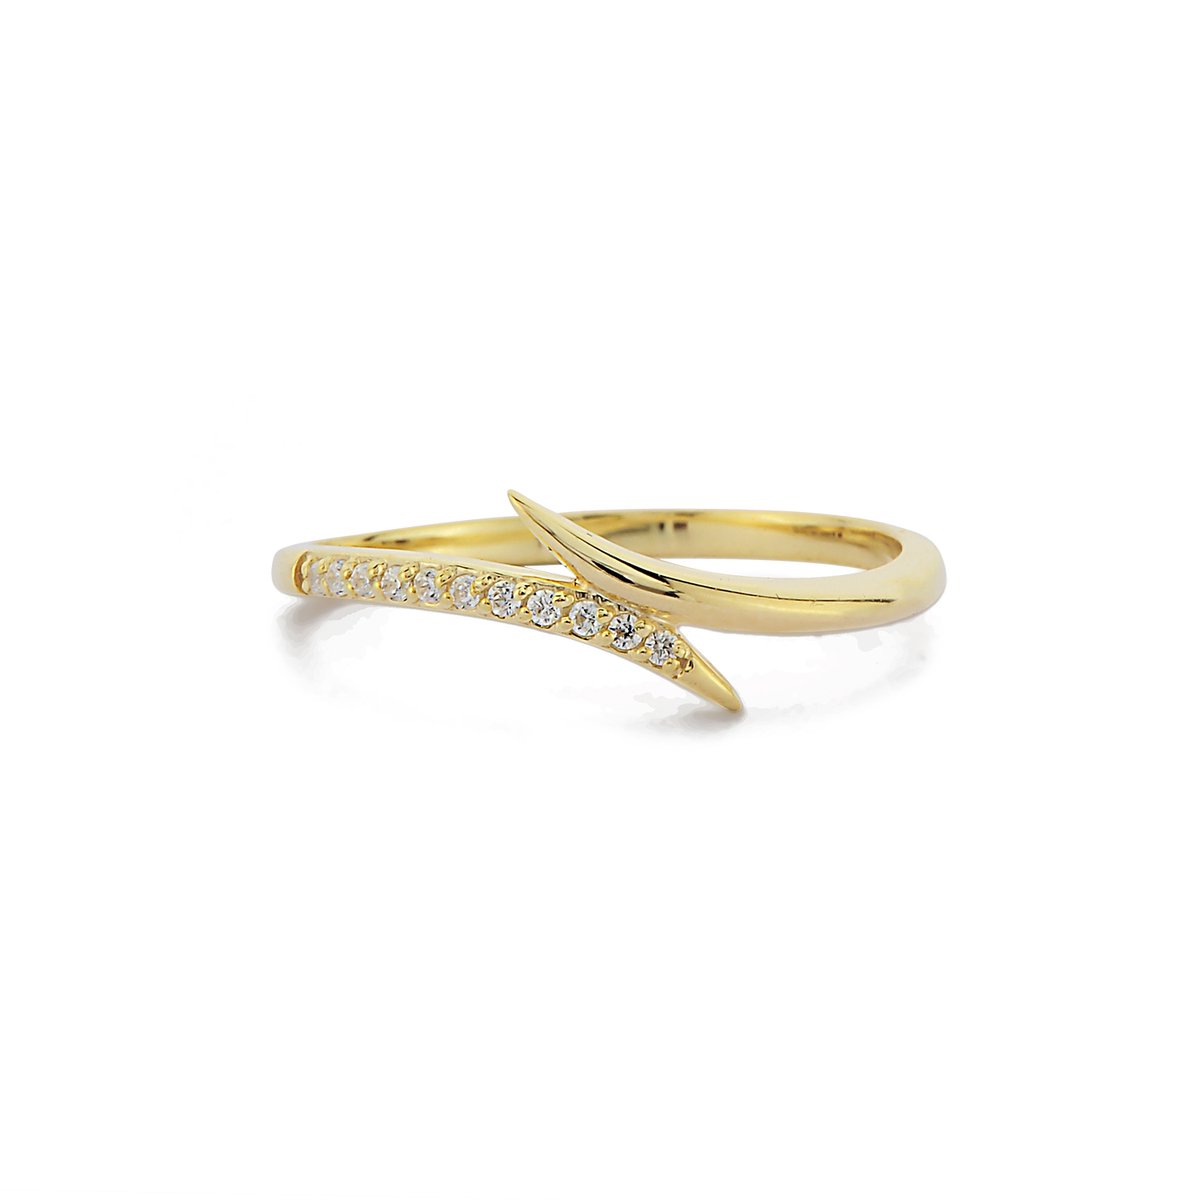 2bs jewelry dames ring, diamanten ring, gouden curved ring, Valentijns cadeau, 14k goud, SI